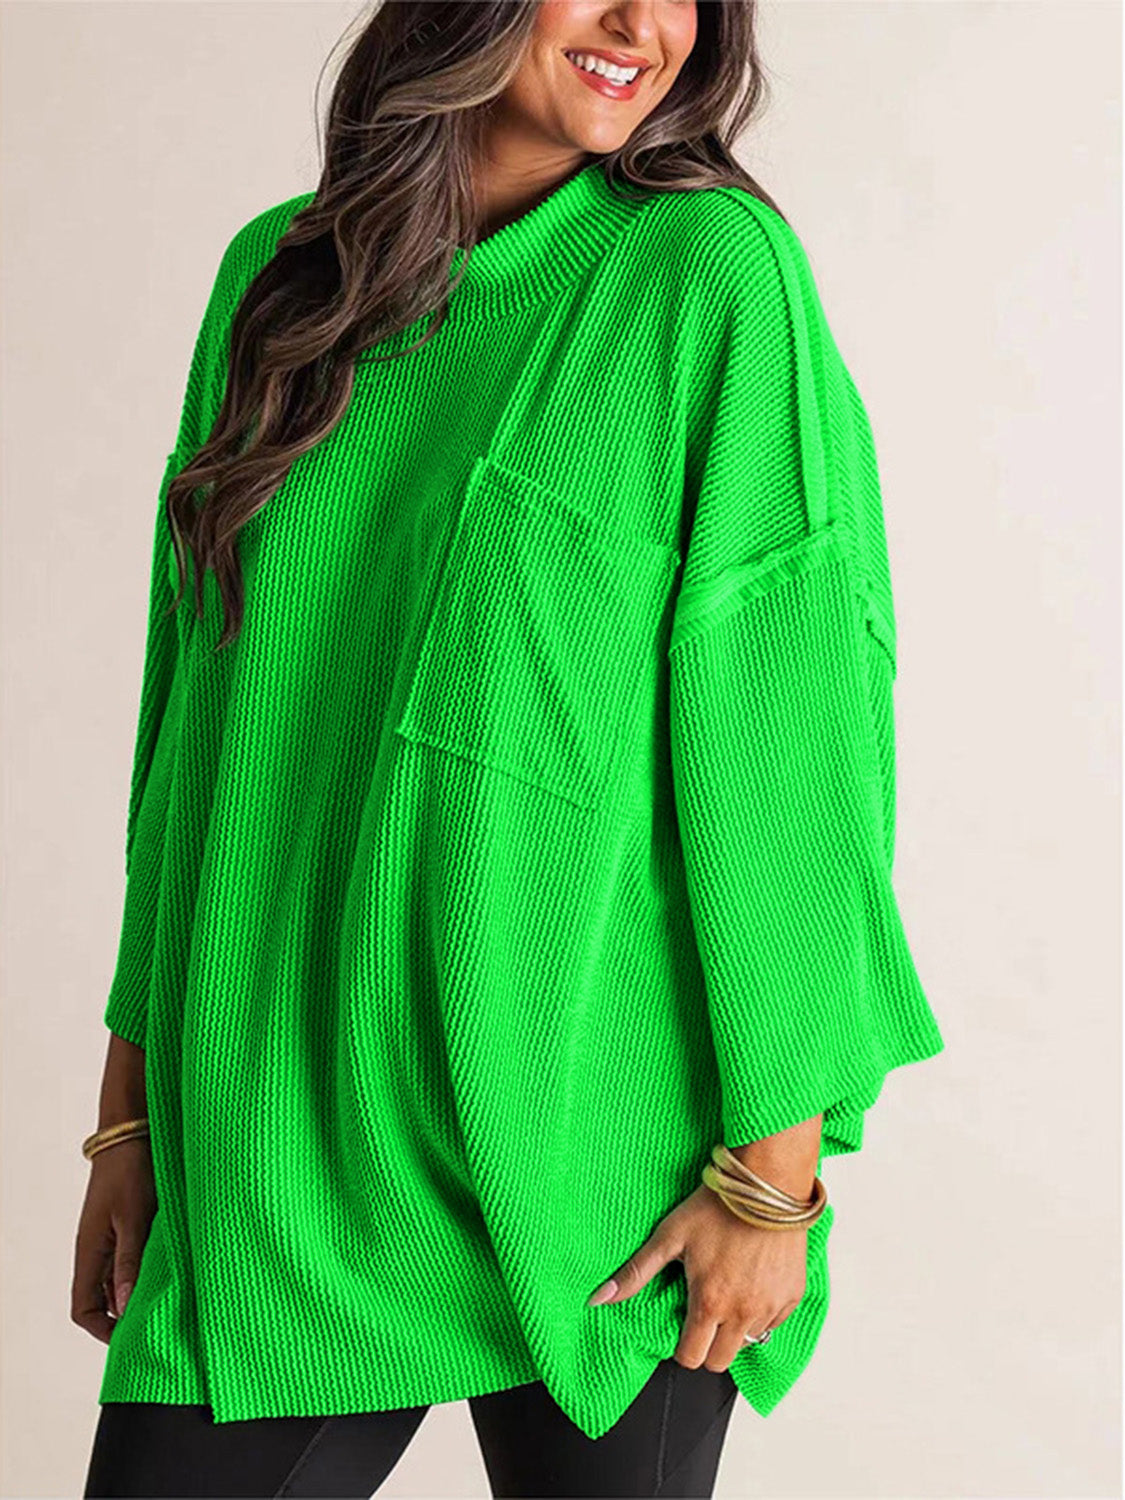 Addie Oversized Dropped Shoulder Top